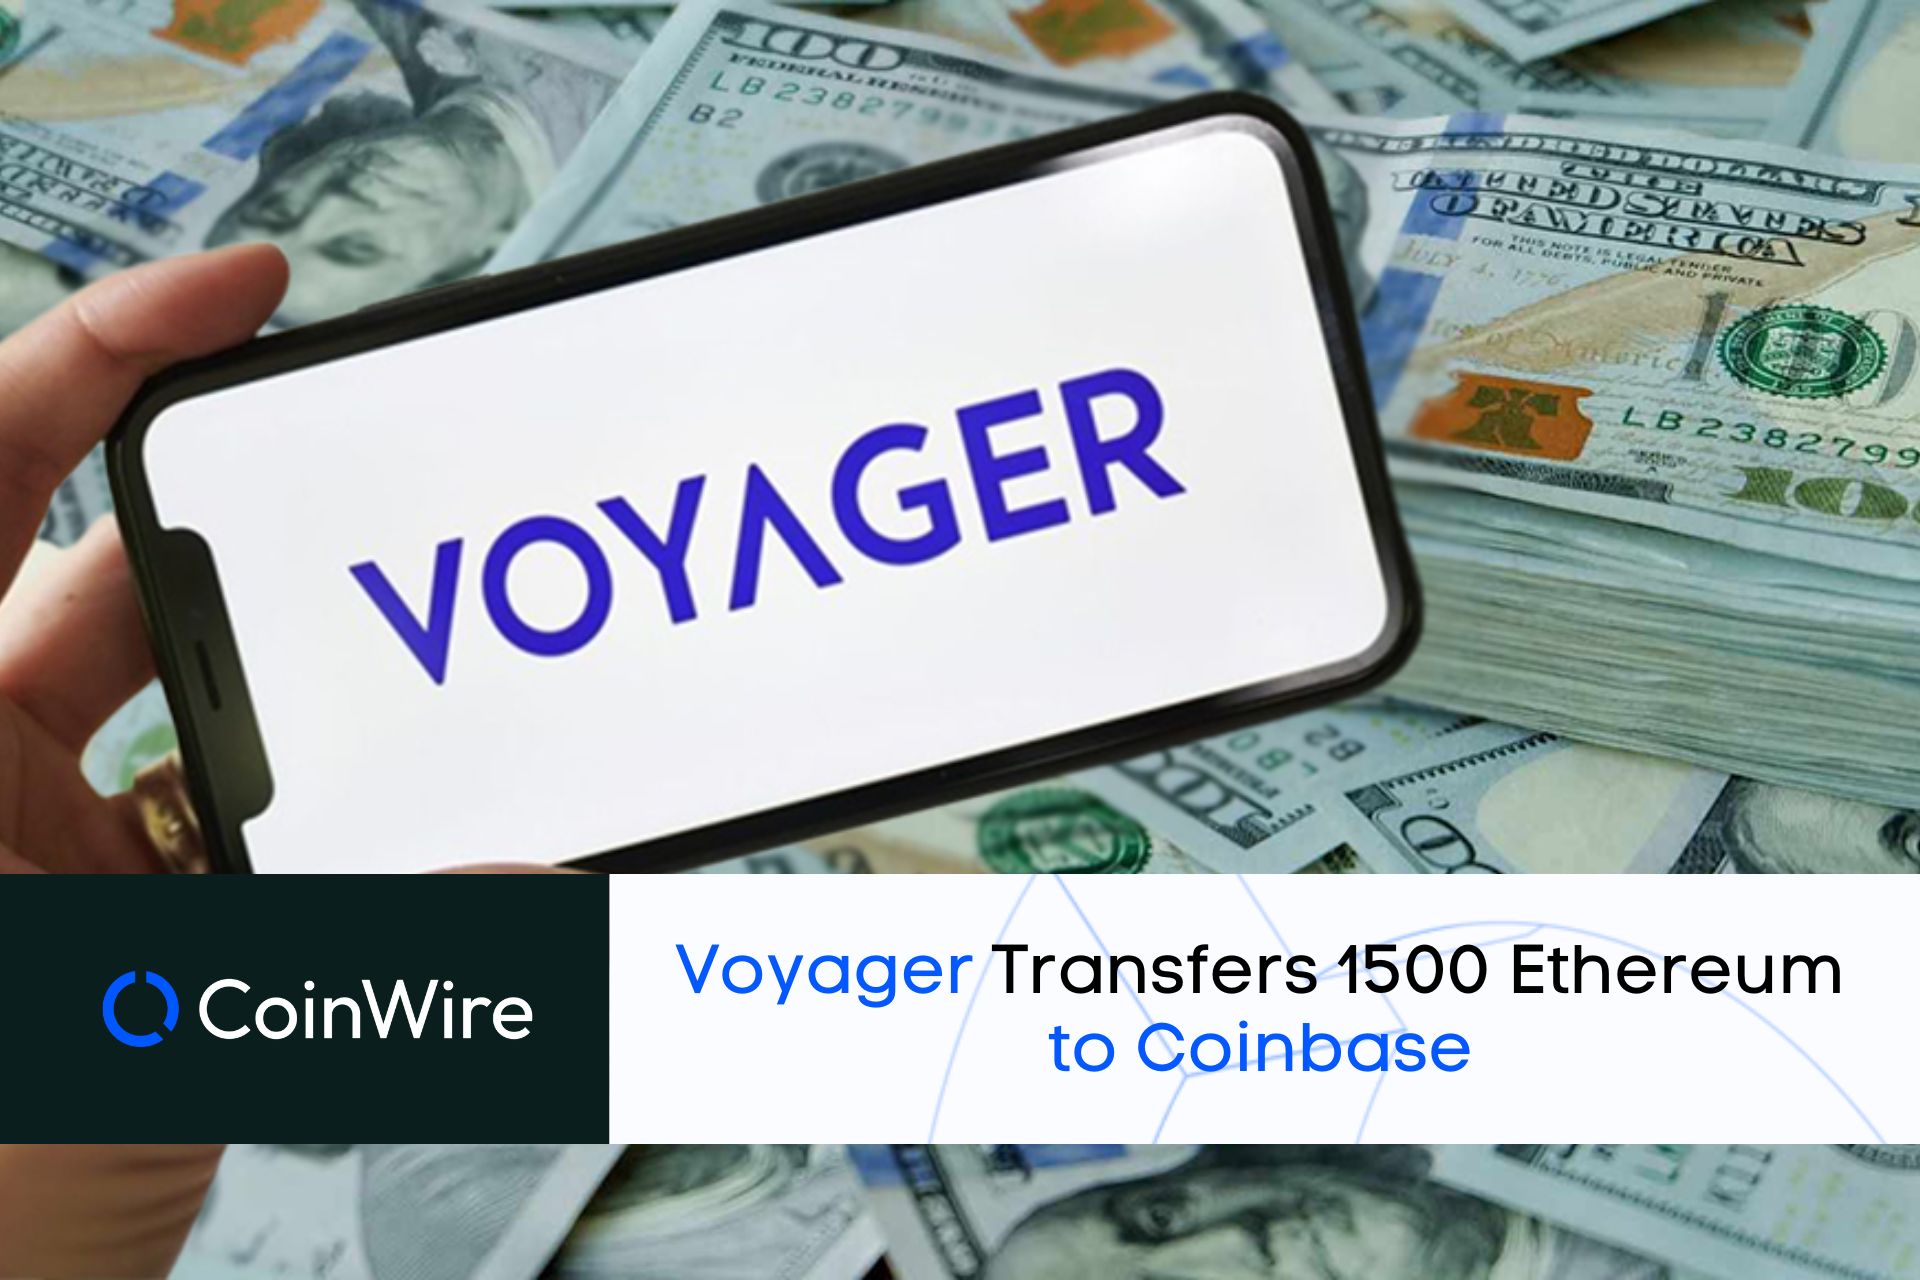 Voyager Transfers 1500 Ethereum To Coinbase